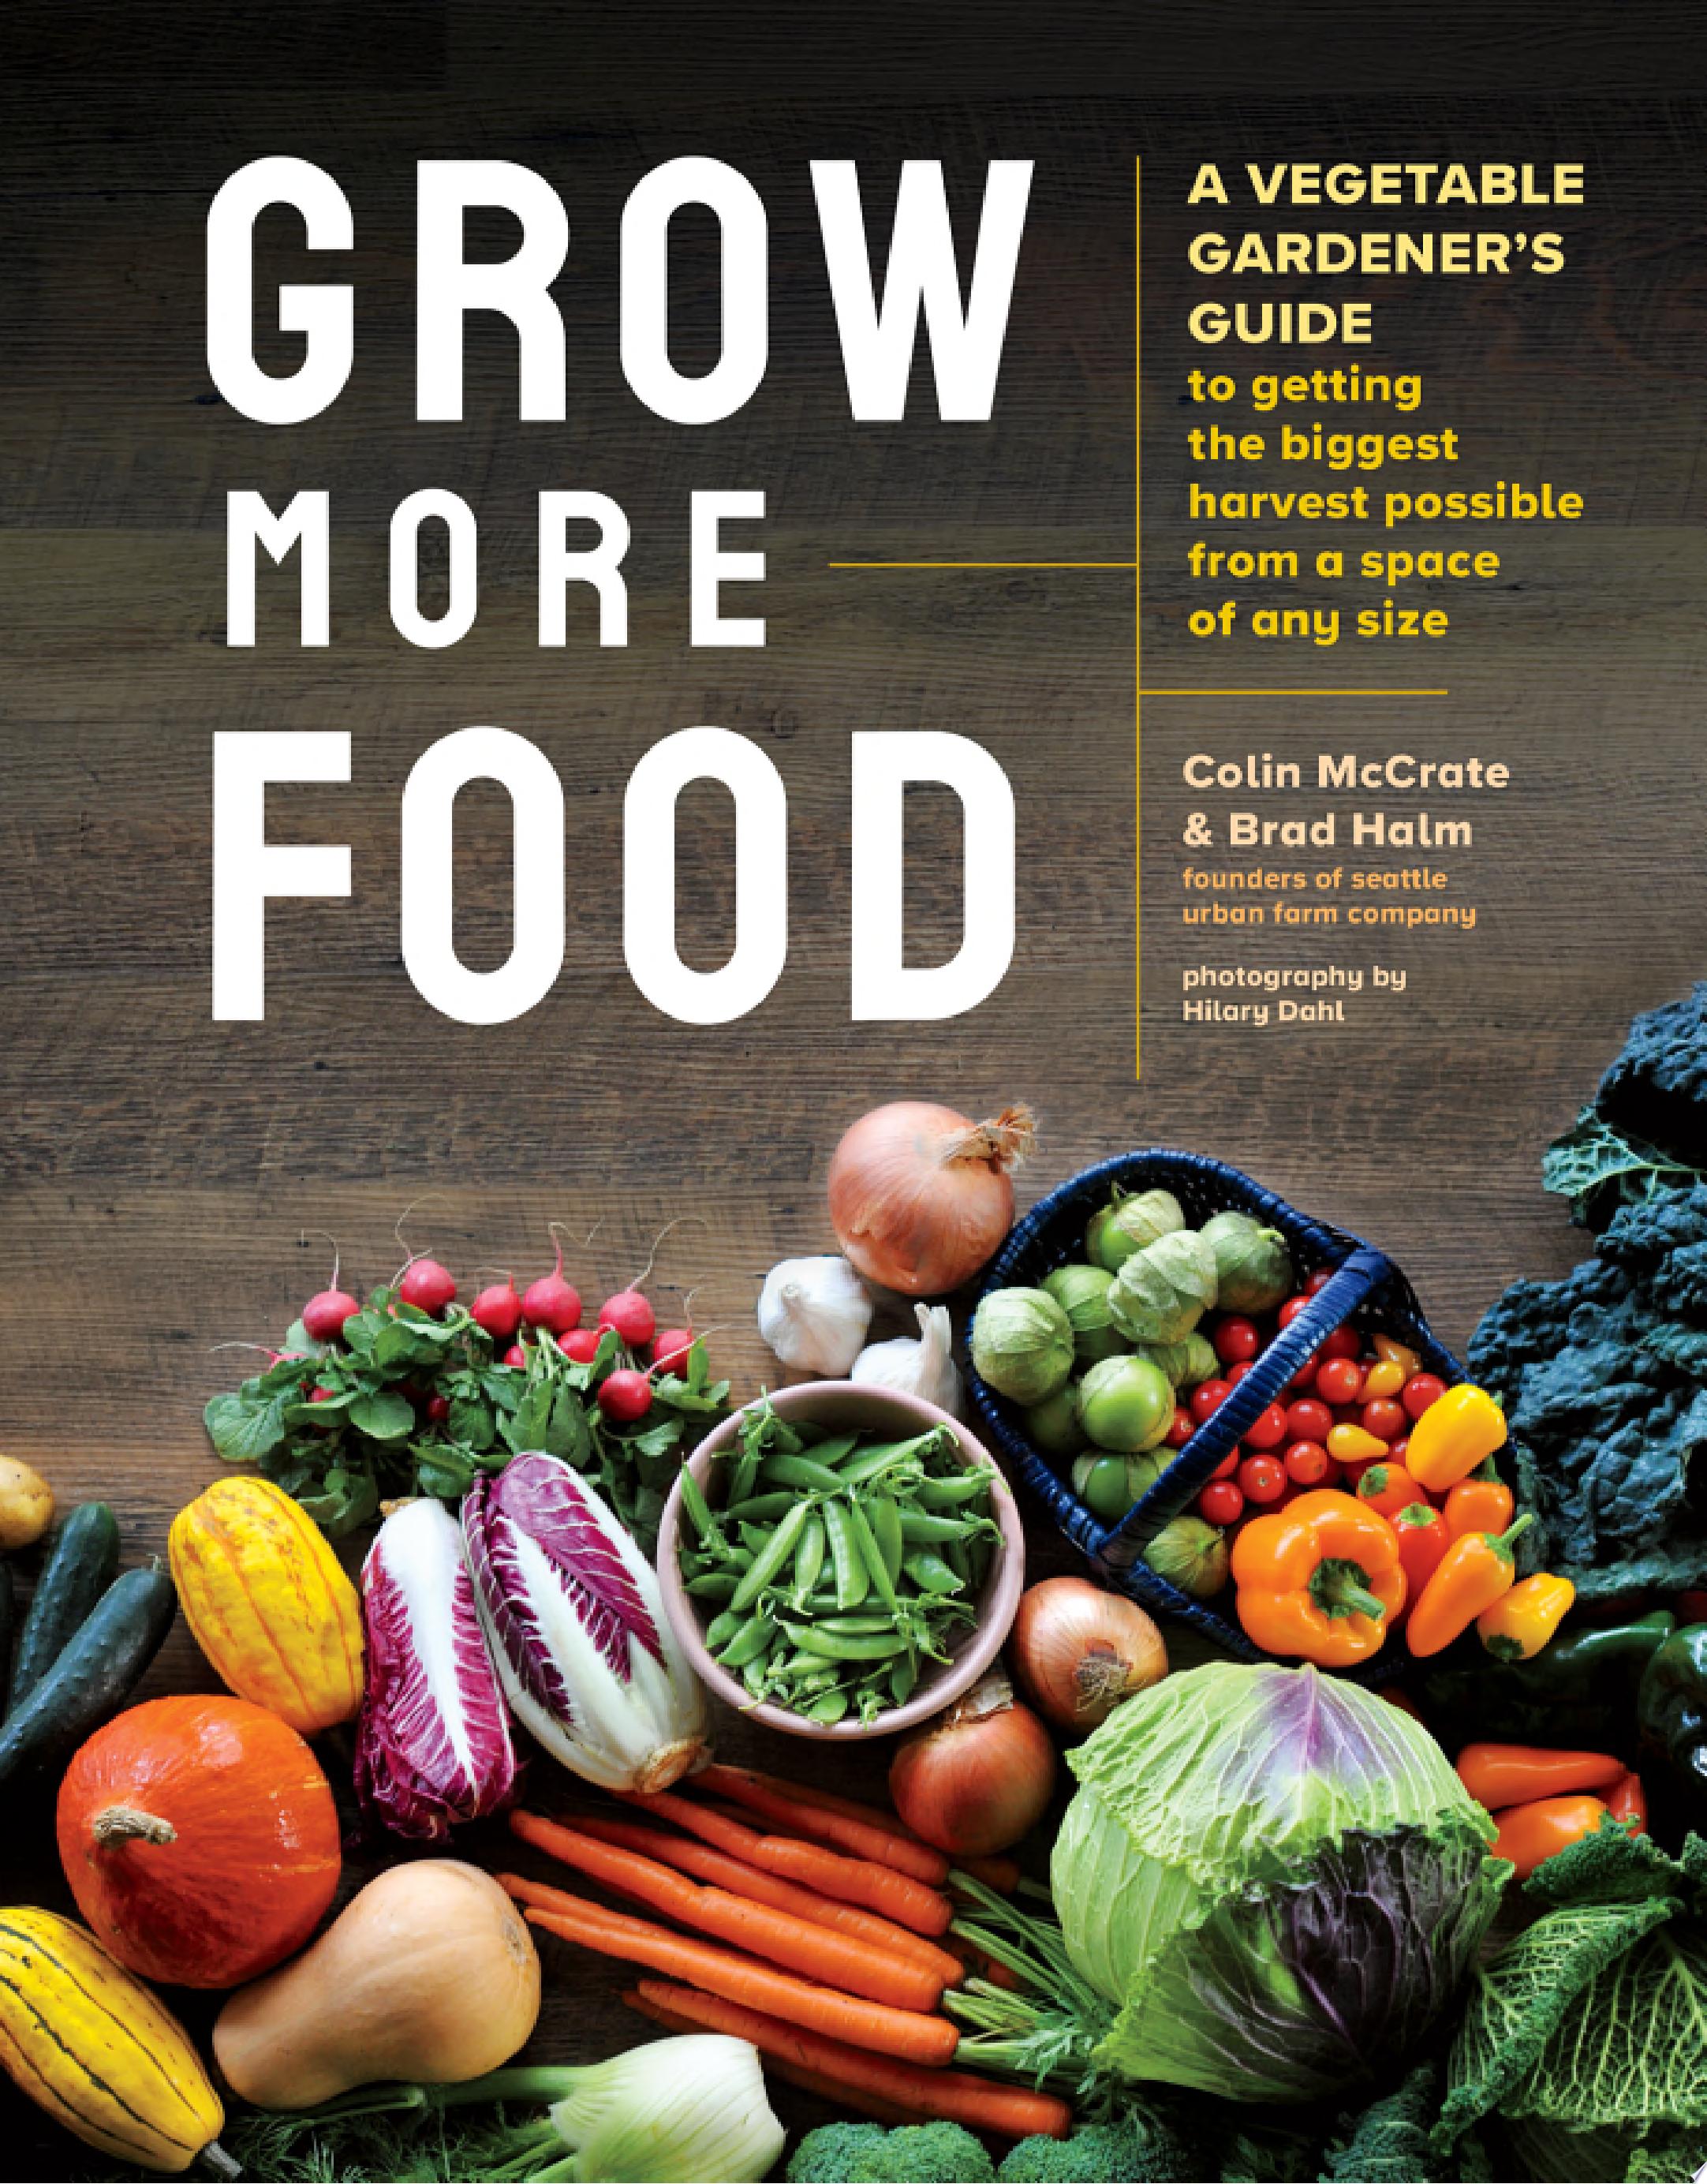 Image for "Grow More Food"